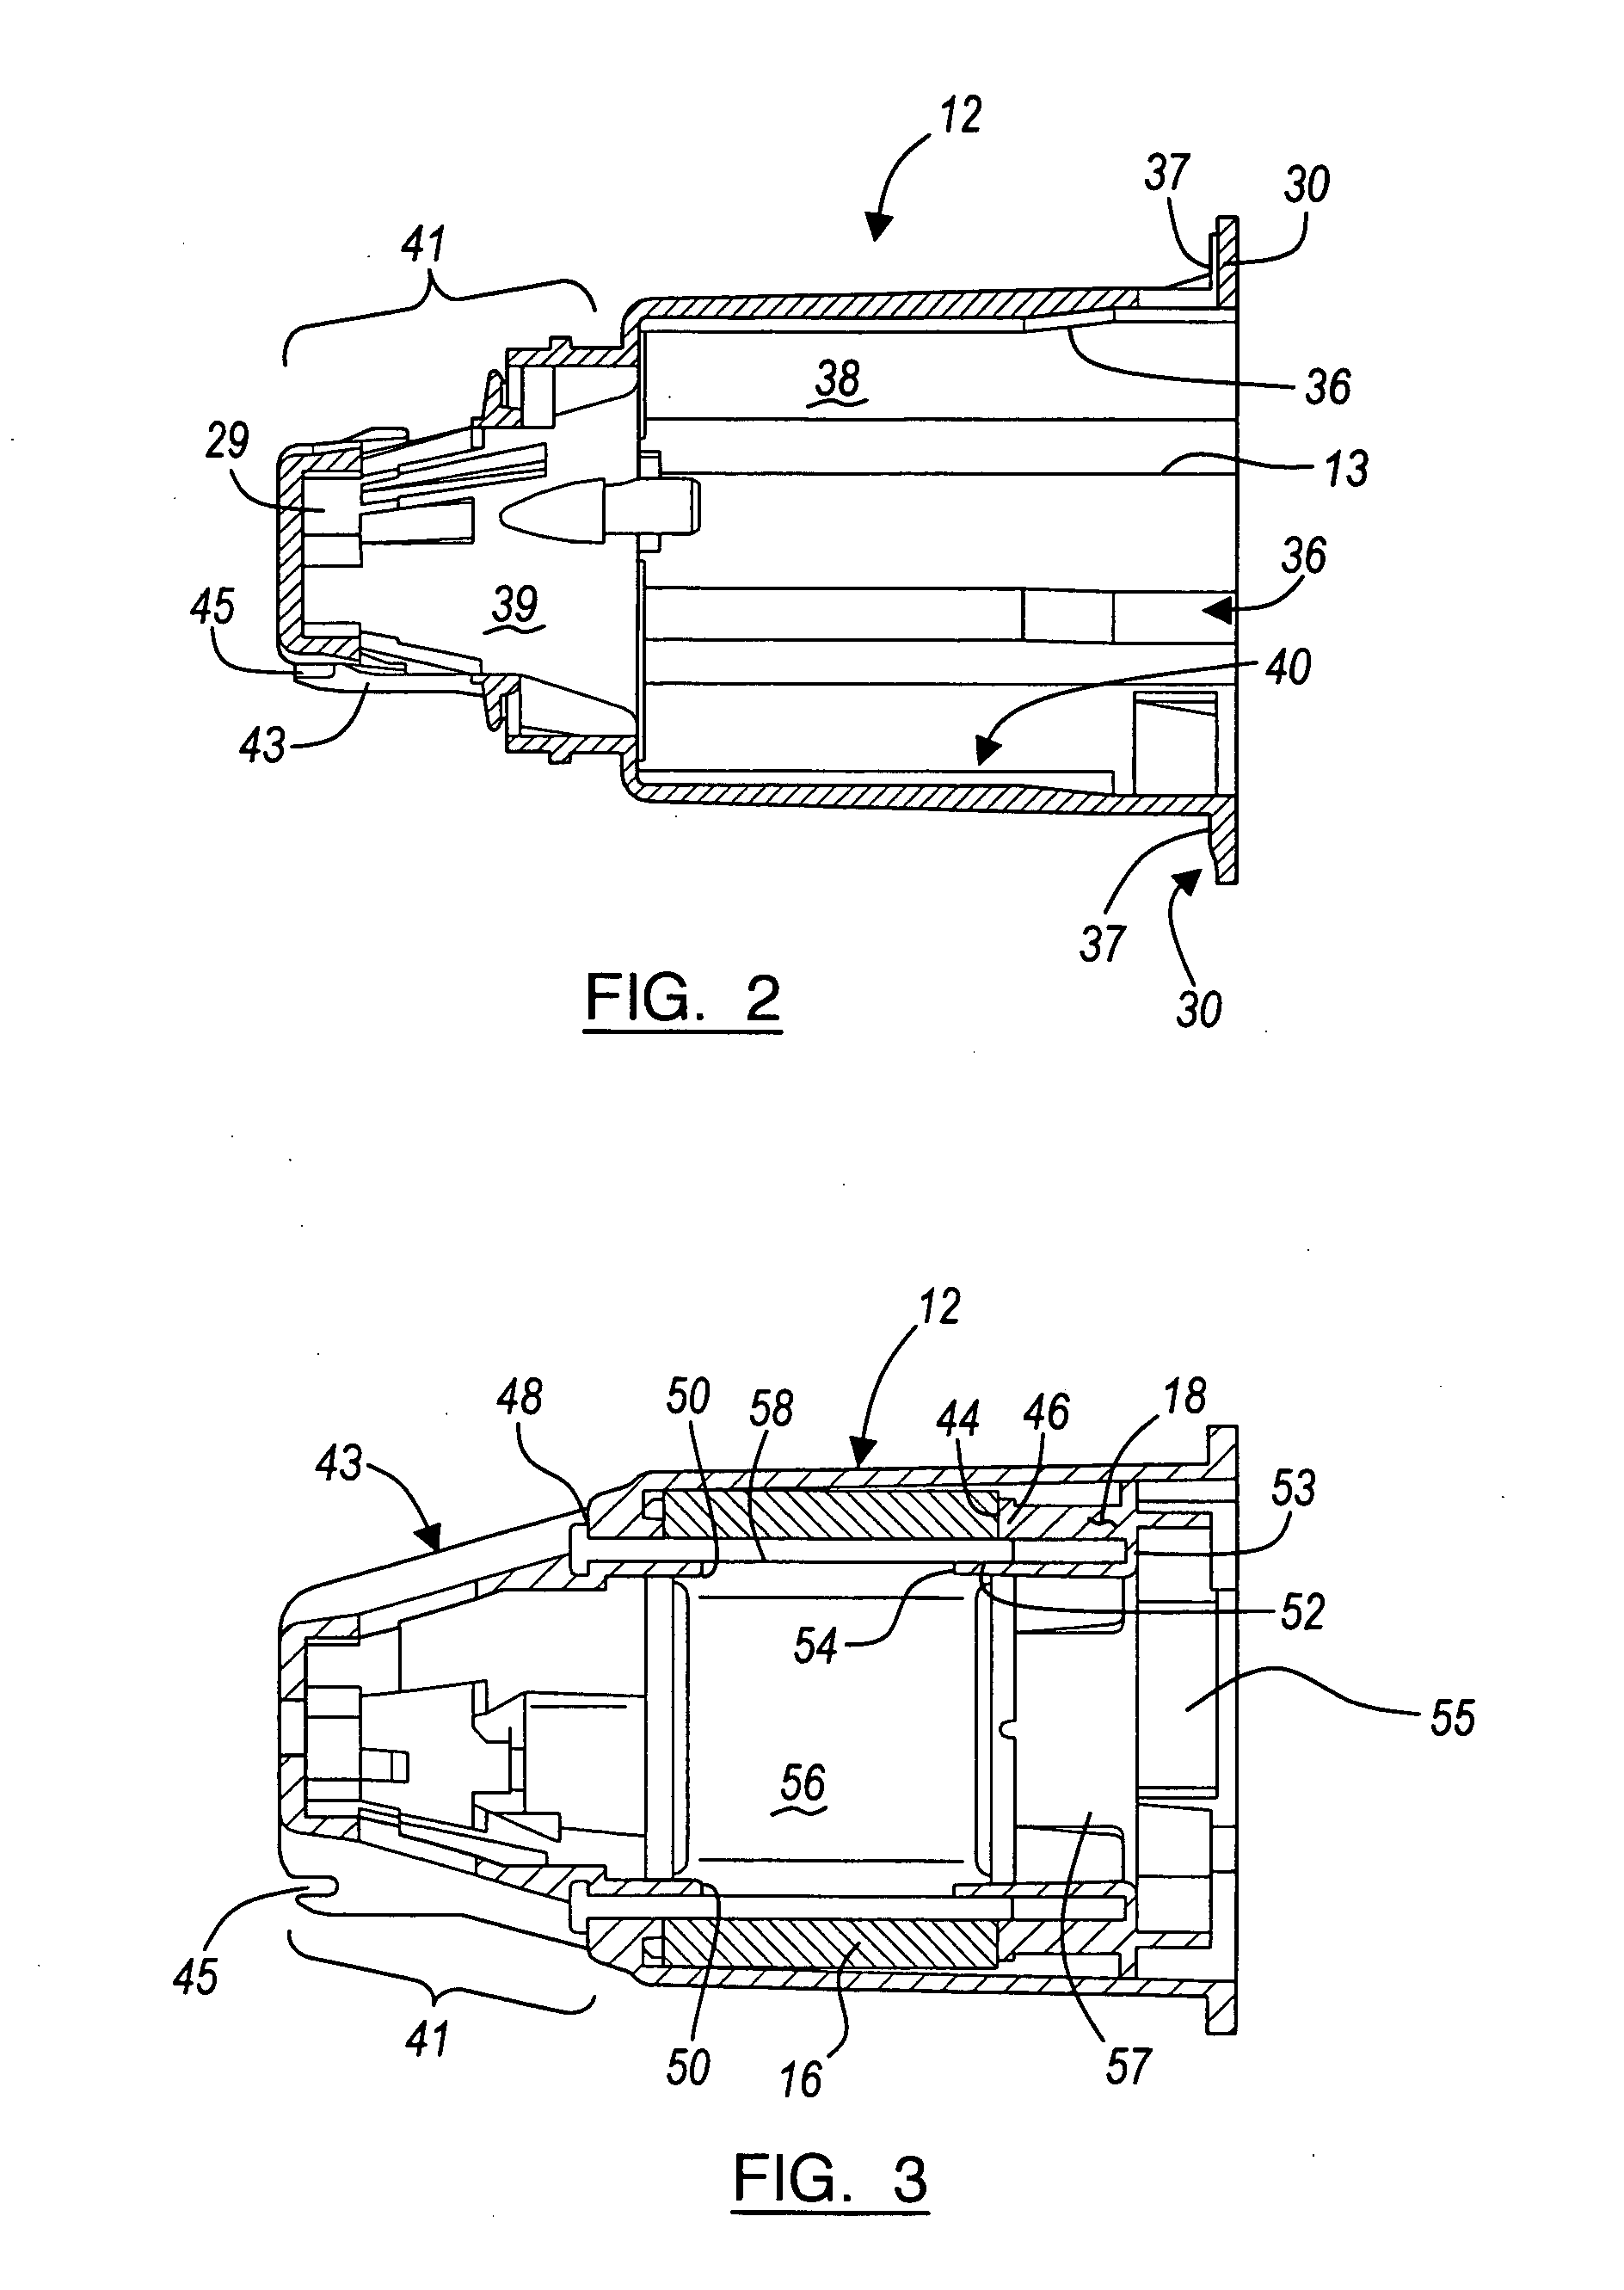 Electric motor brush assembly